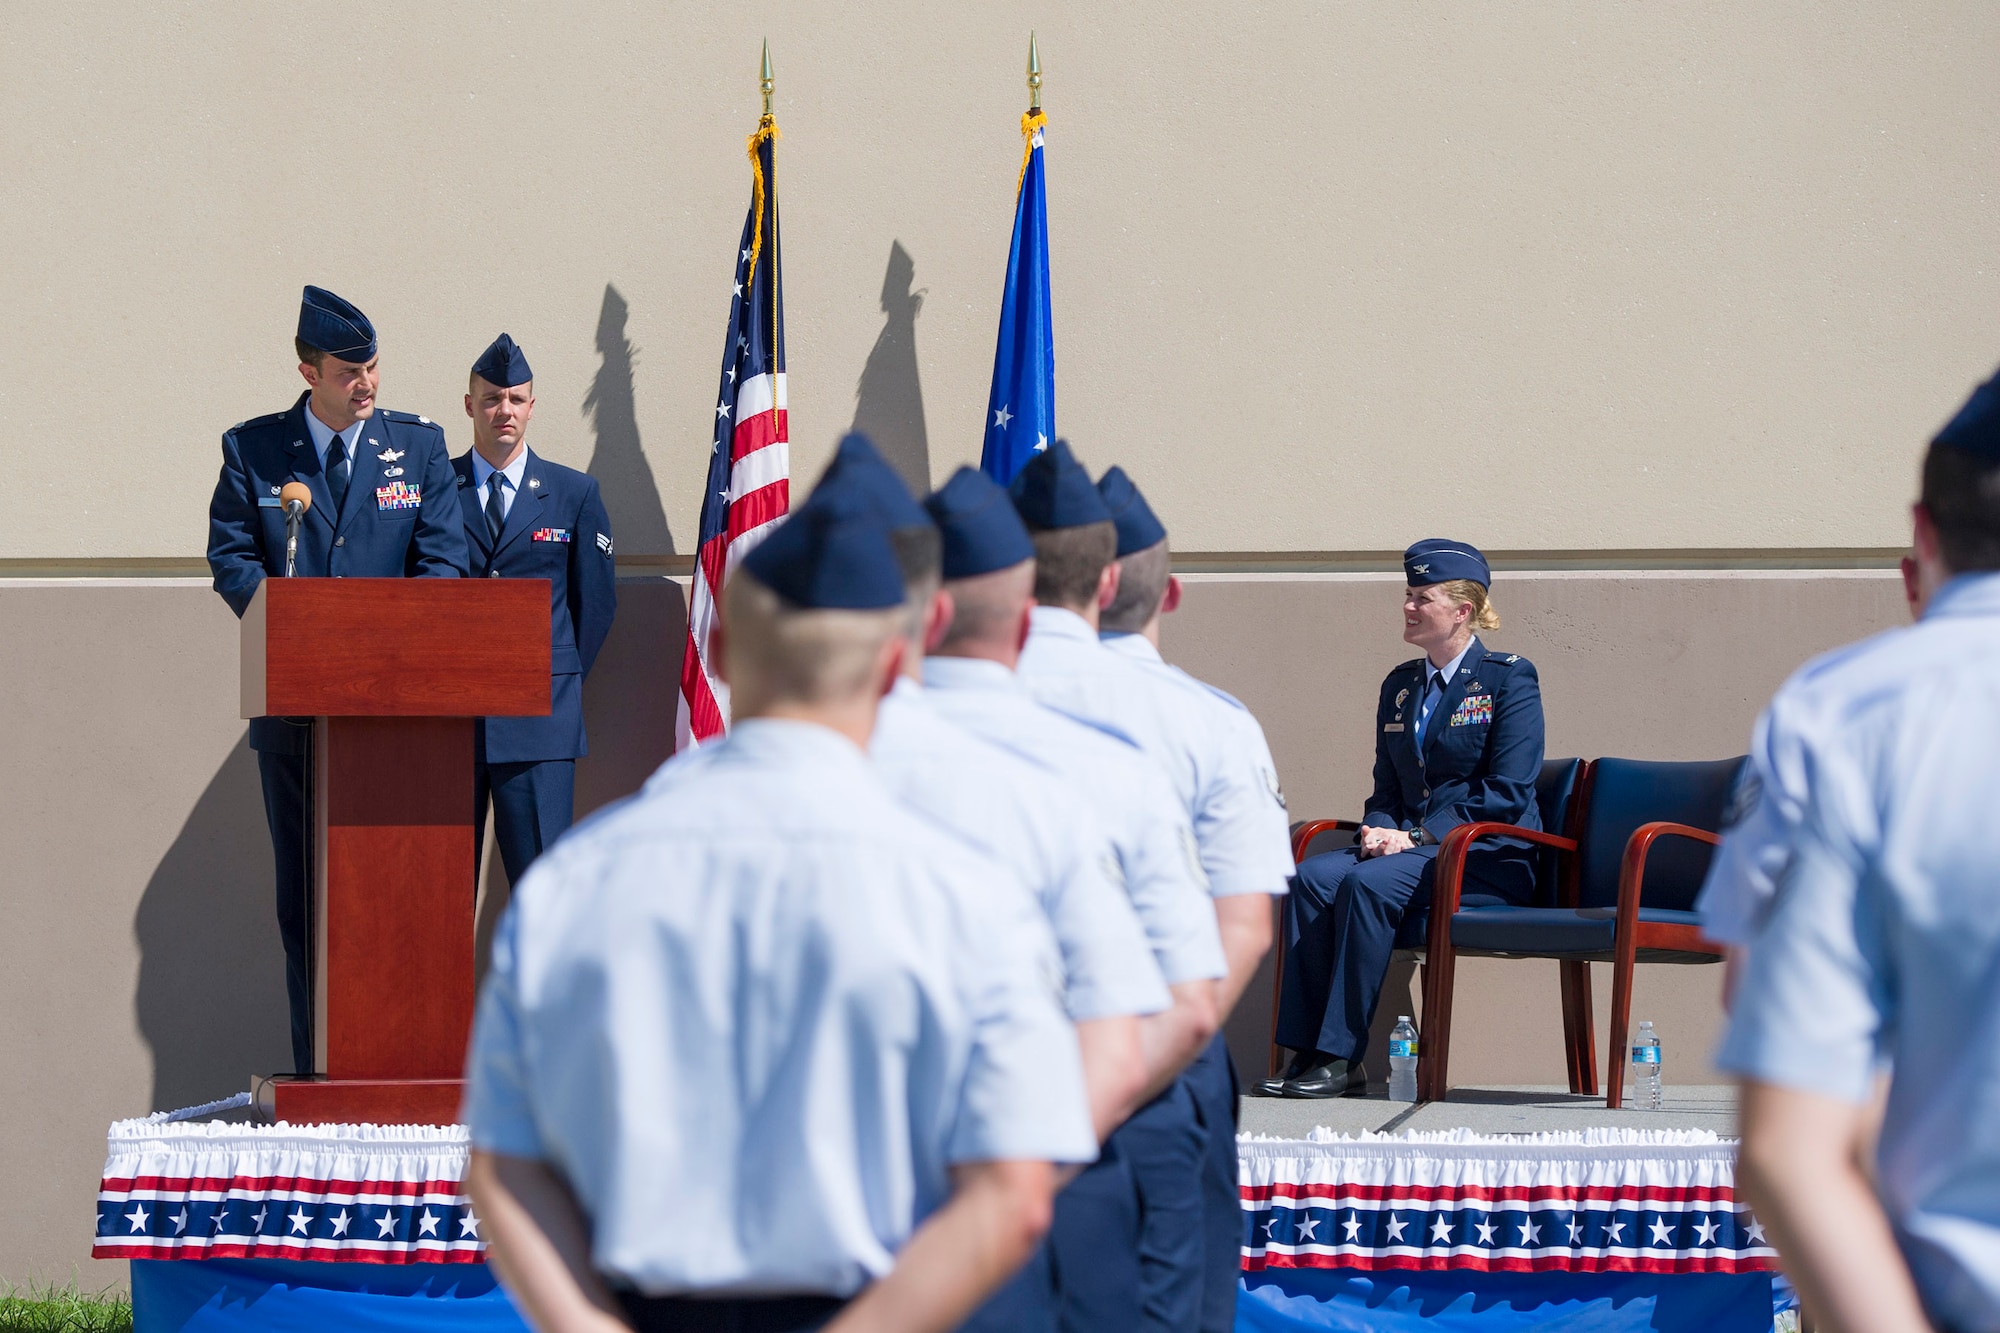 Col. Jennifer P. Sovada (right), the Air Force Technical Applications Center commander, looks on as Lt. Col. Ehren Carl delivers his first remarks after assuming command of AFTAC’s Technical Surveillance Squadron at Patrick AFB, Fla., Oct. 15, 2015. Carl is the first officer to assume command of one of five newly-formed squadrons at AFTAC. (U.S. Air Force photo/Matthew Jurgens)